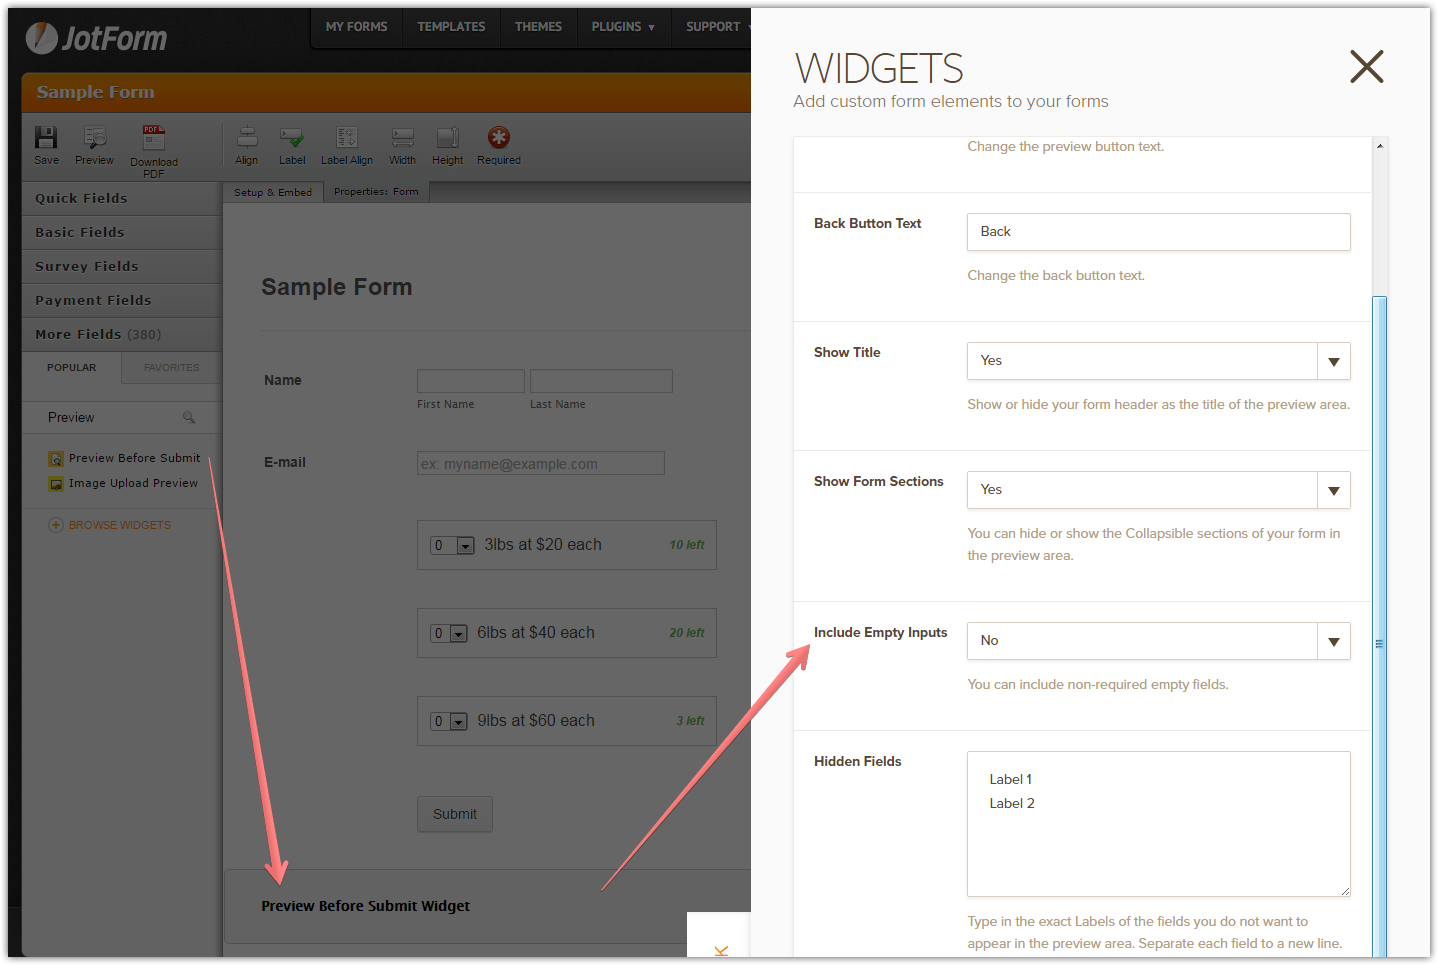 Hide Empty Fields on Emails: Does not hide unfilled Inventory widget fields Image 1 Screenshot 20